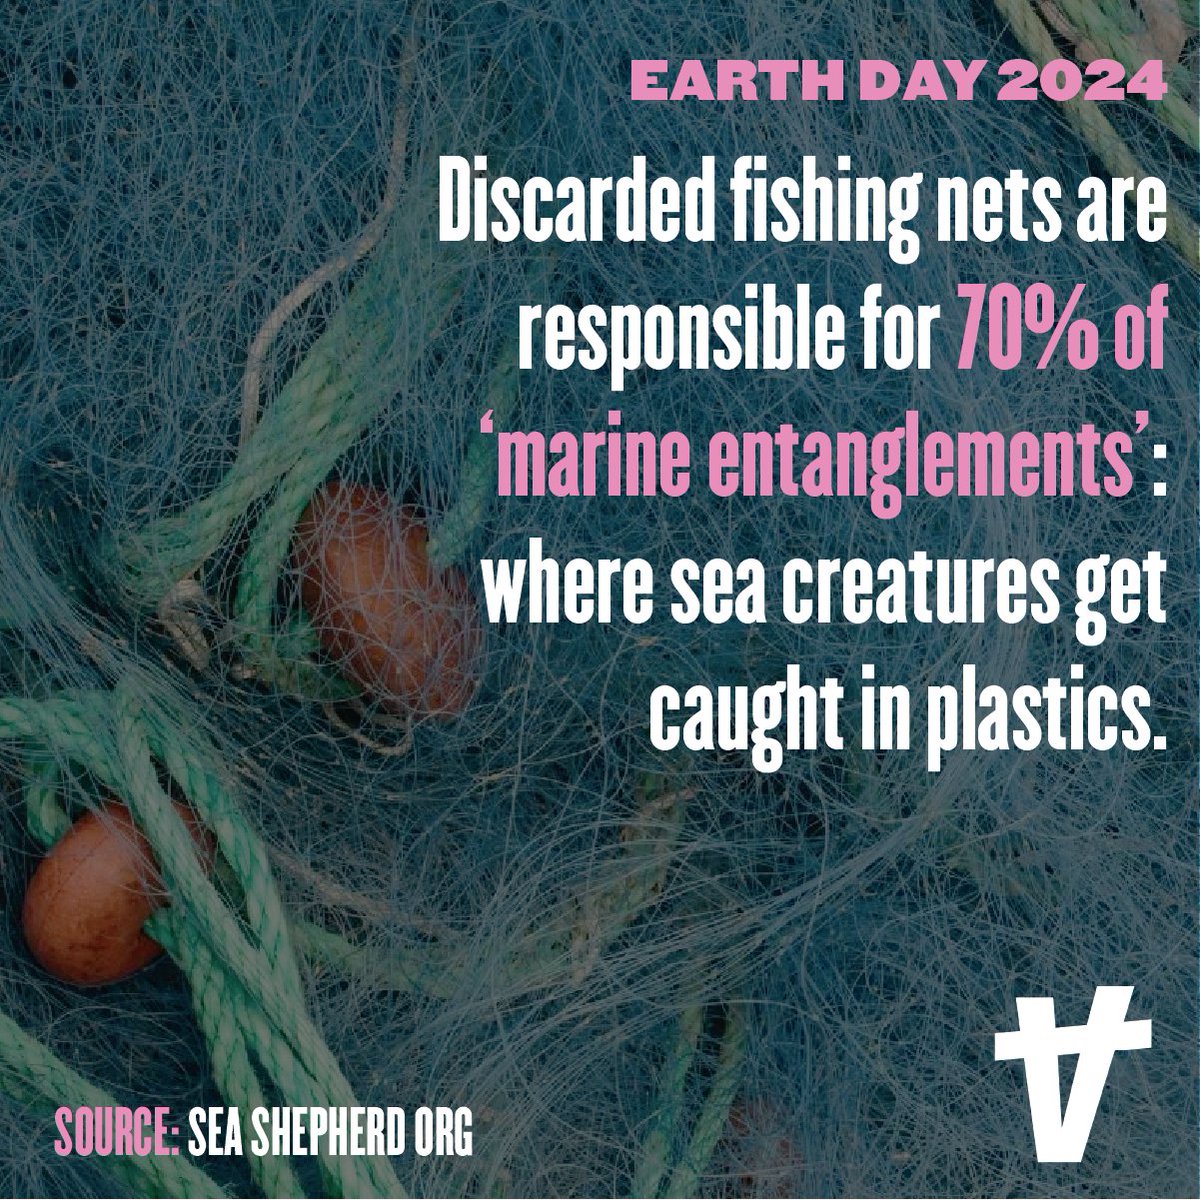 EARTH DAY 2024 - PEOPLE VS. PLASTICS If we are serious about tackling plastics and helping countless creatures in our oceans, we should start by taking them off the menu - and nets out of our oceans - with the transition to a plant-based food system. @seashepherd @EarthDay